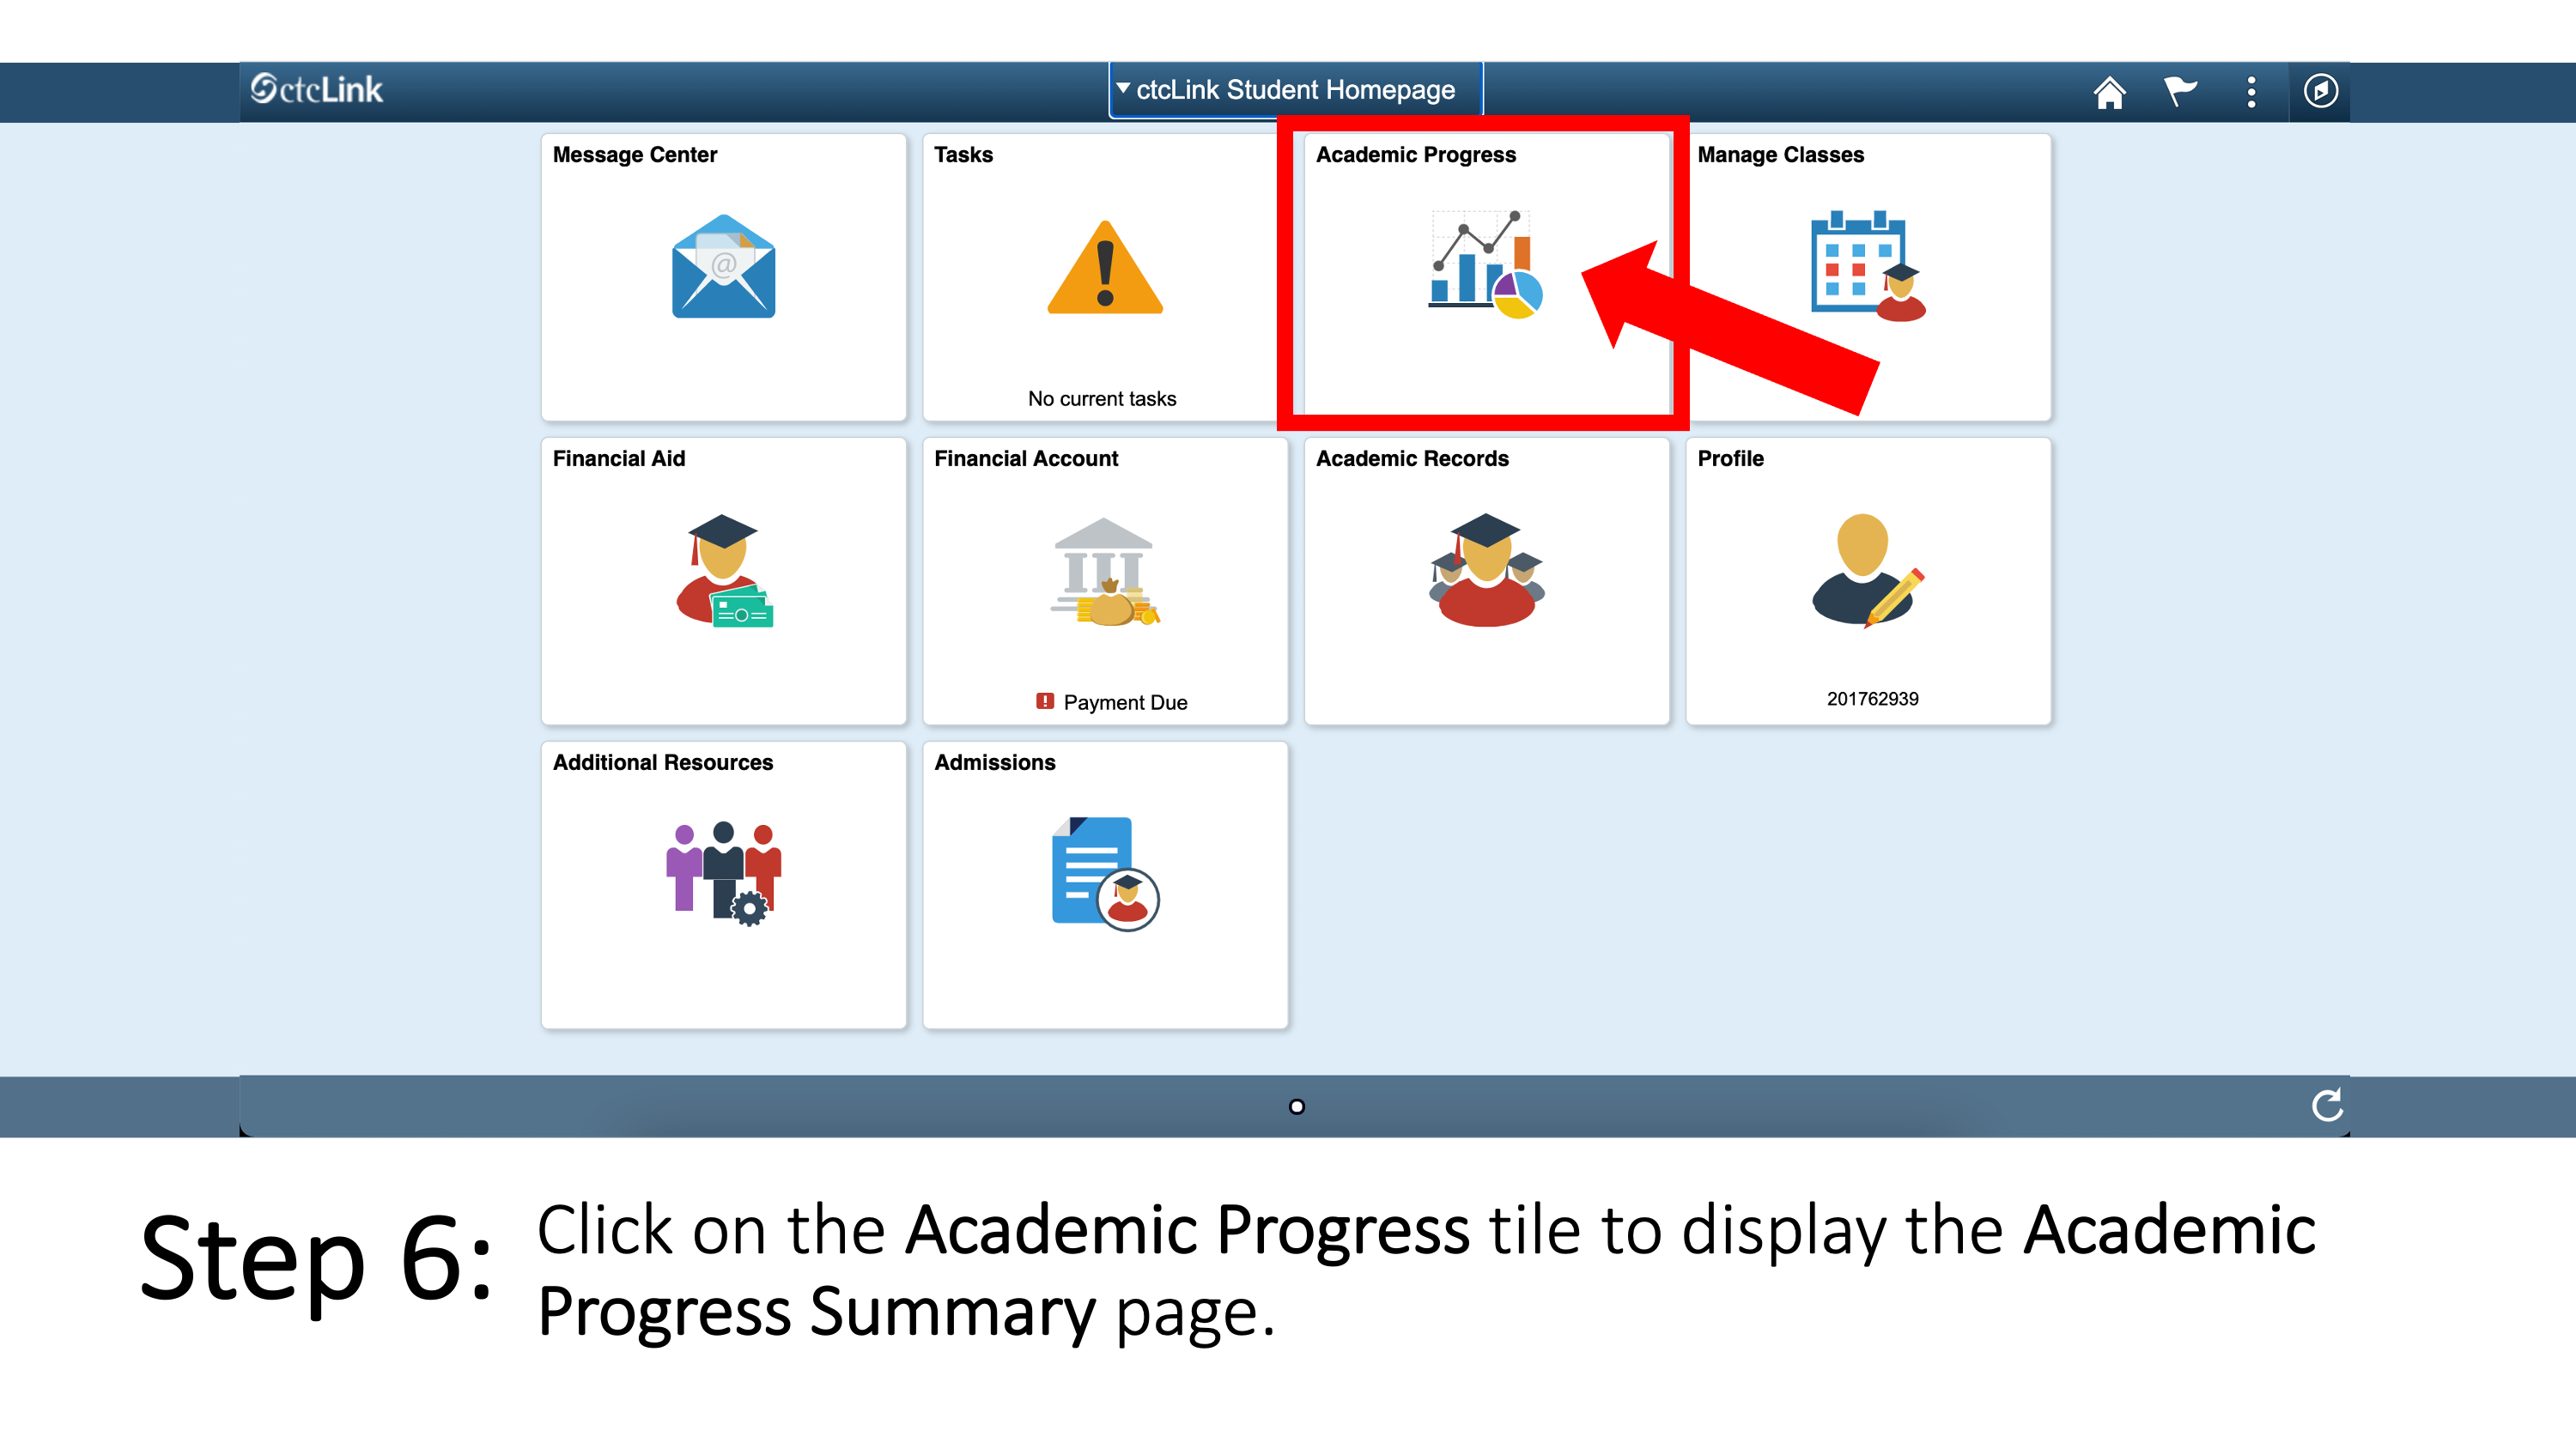 Step 6: Click on the Academic Progress tile to display the Academic Progress Summary page.